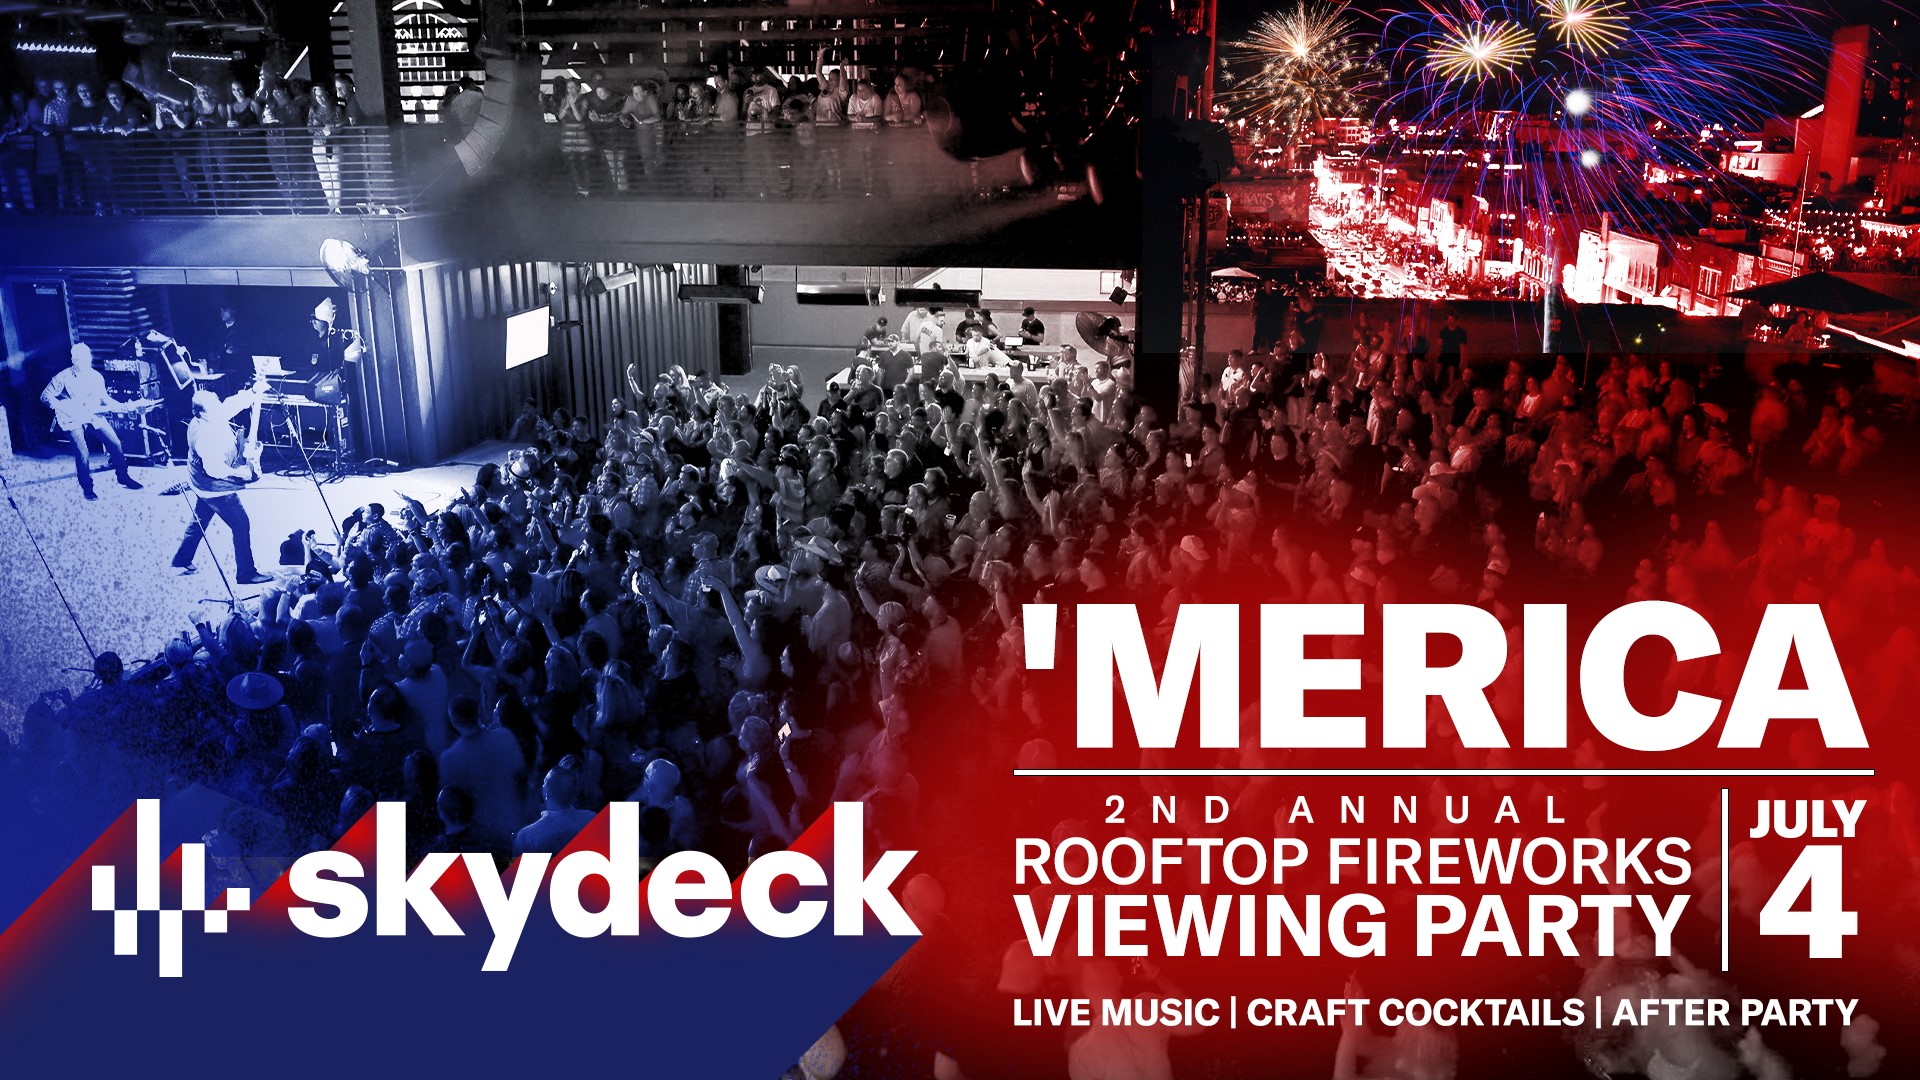 2nd Annual Rooftop Firework Viewing Party